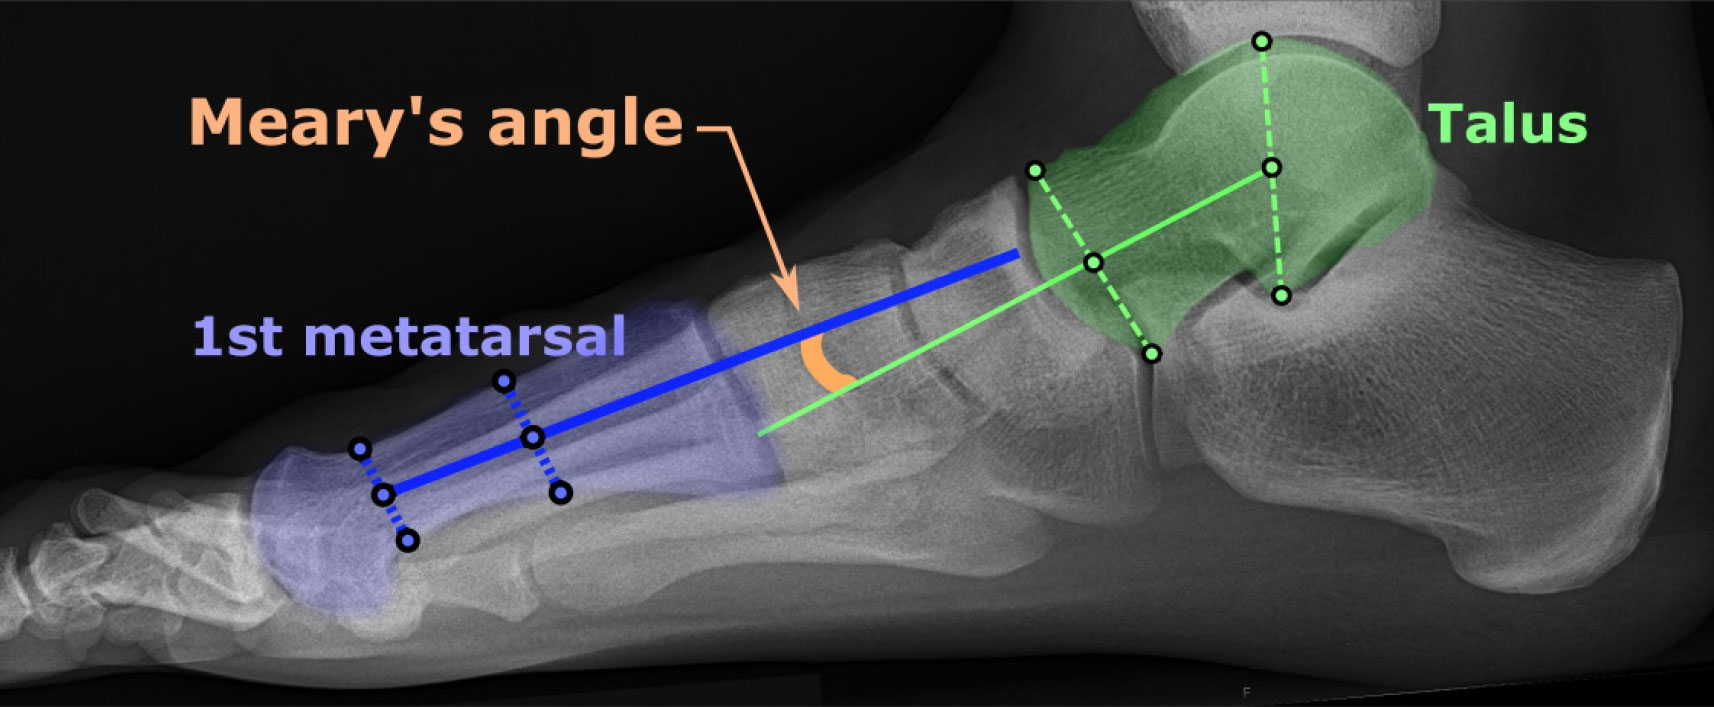 Pediatric Arch Pain Linked to Talus-1/-2 Metatarsal Angles